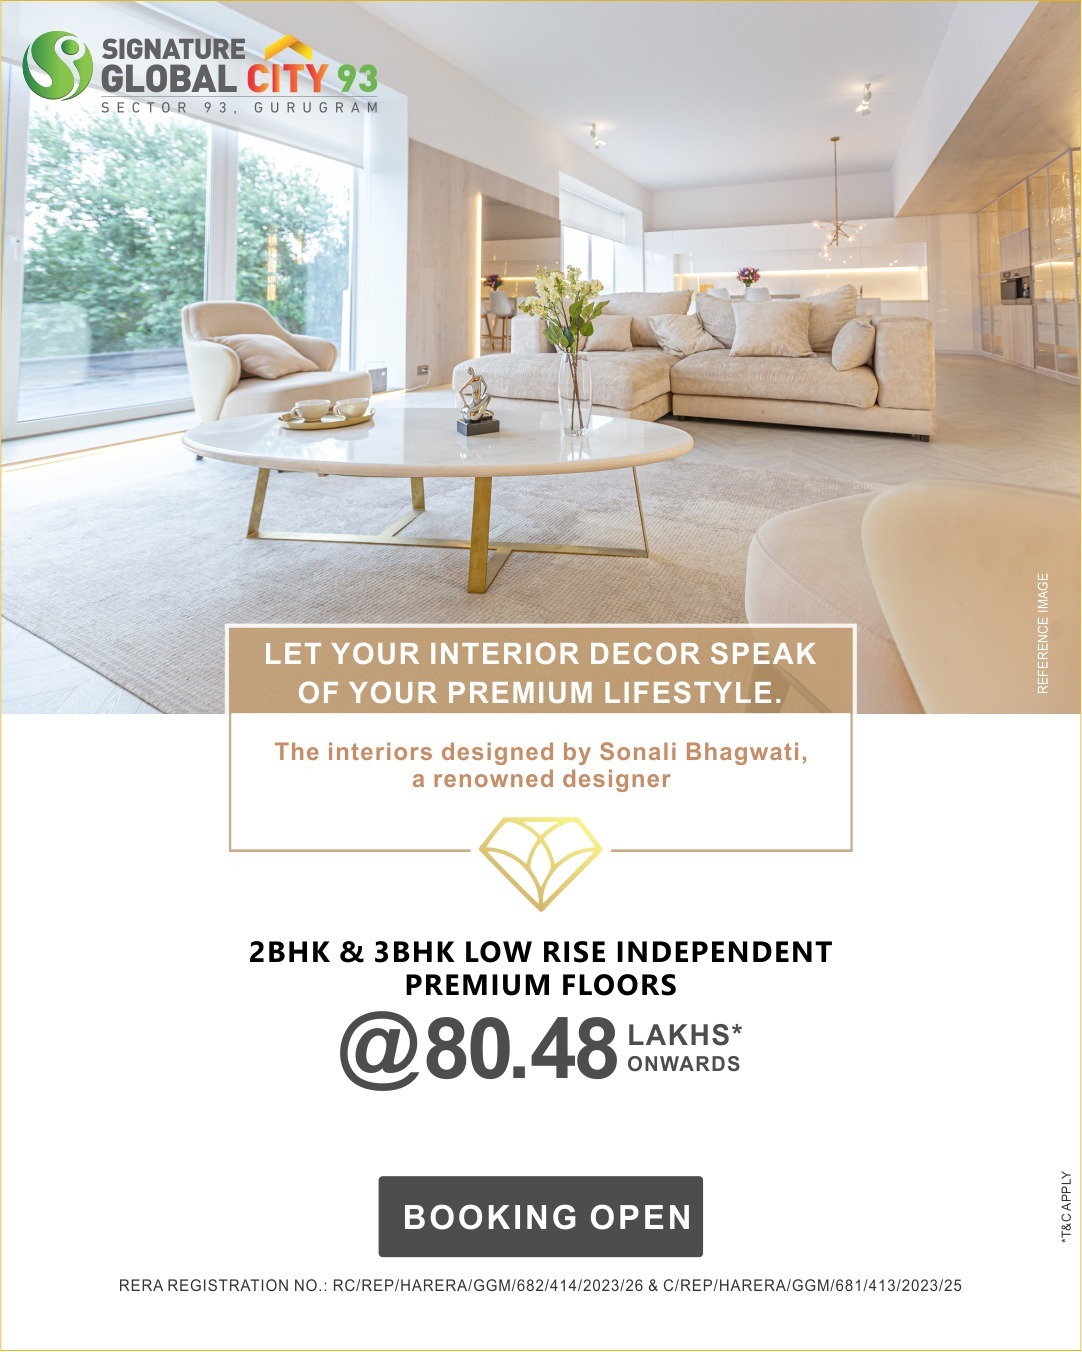 Book your dream home at Signature Global City 93, Sector 93, Gurgaon